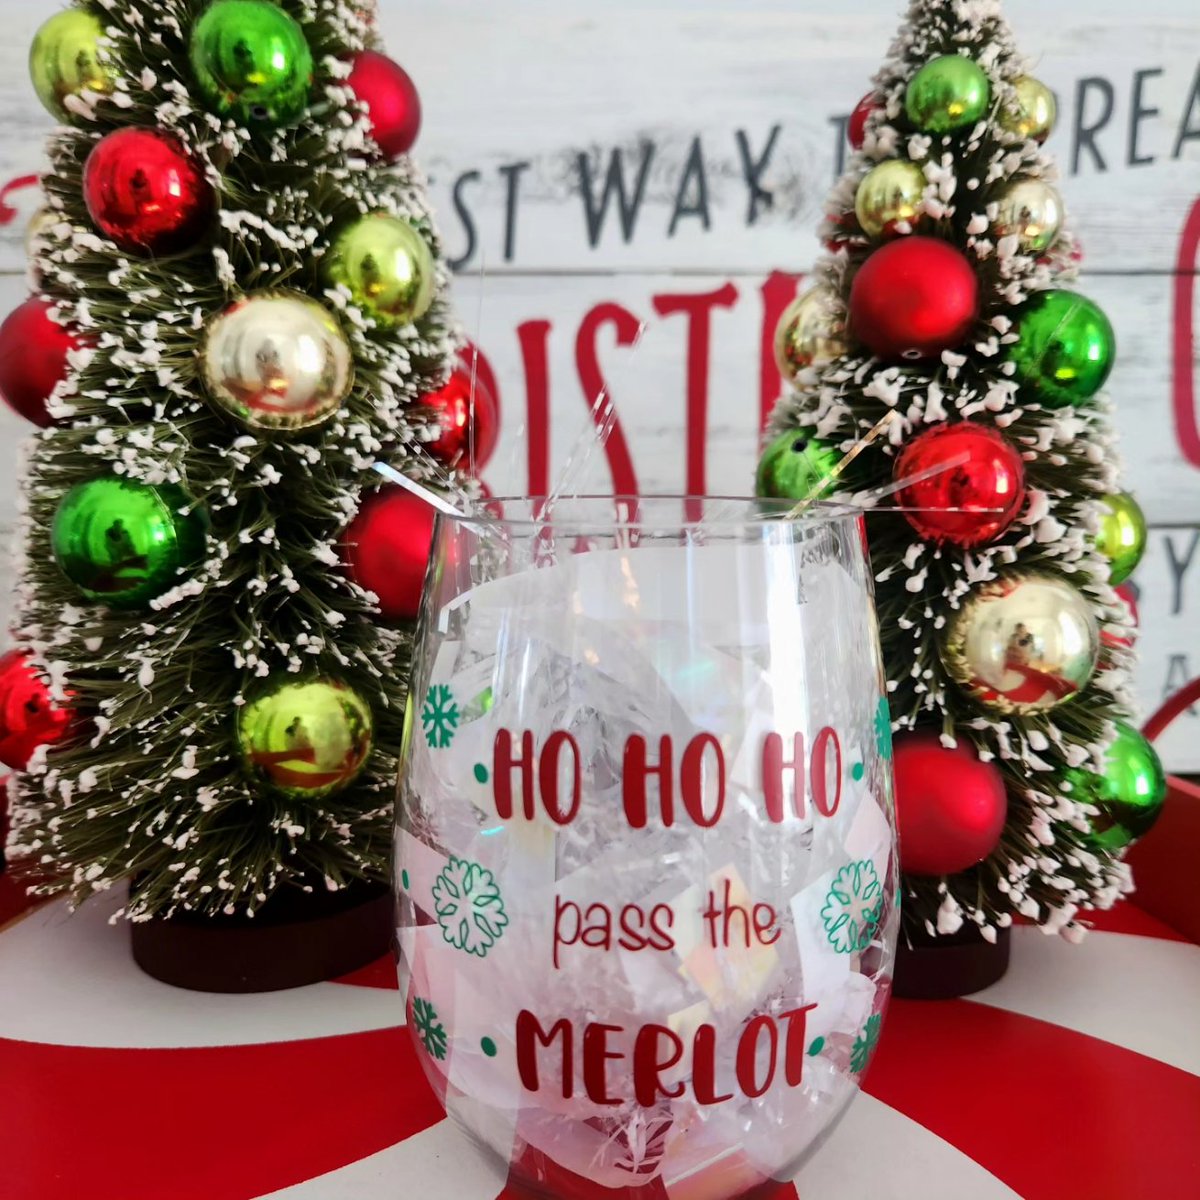 🎄🎅 Time to switch over your fancy wine glasses to something a little more cheeky for the rest of the year 🎅🎄

simplysparklystudio.etsy.com/listing/161805…

#simplysparklystudio #hohohopassthemerlot #stemlesswineglass #secretsantagift #hostessgift #cheeky #etsy  #christmasgift #holidaygift